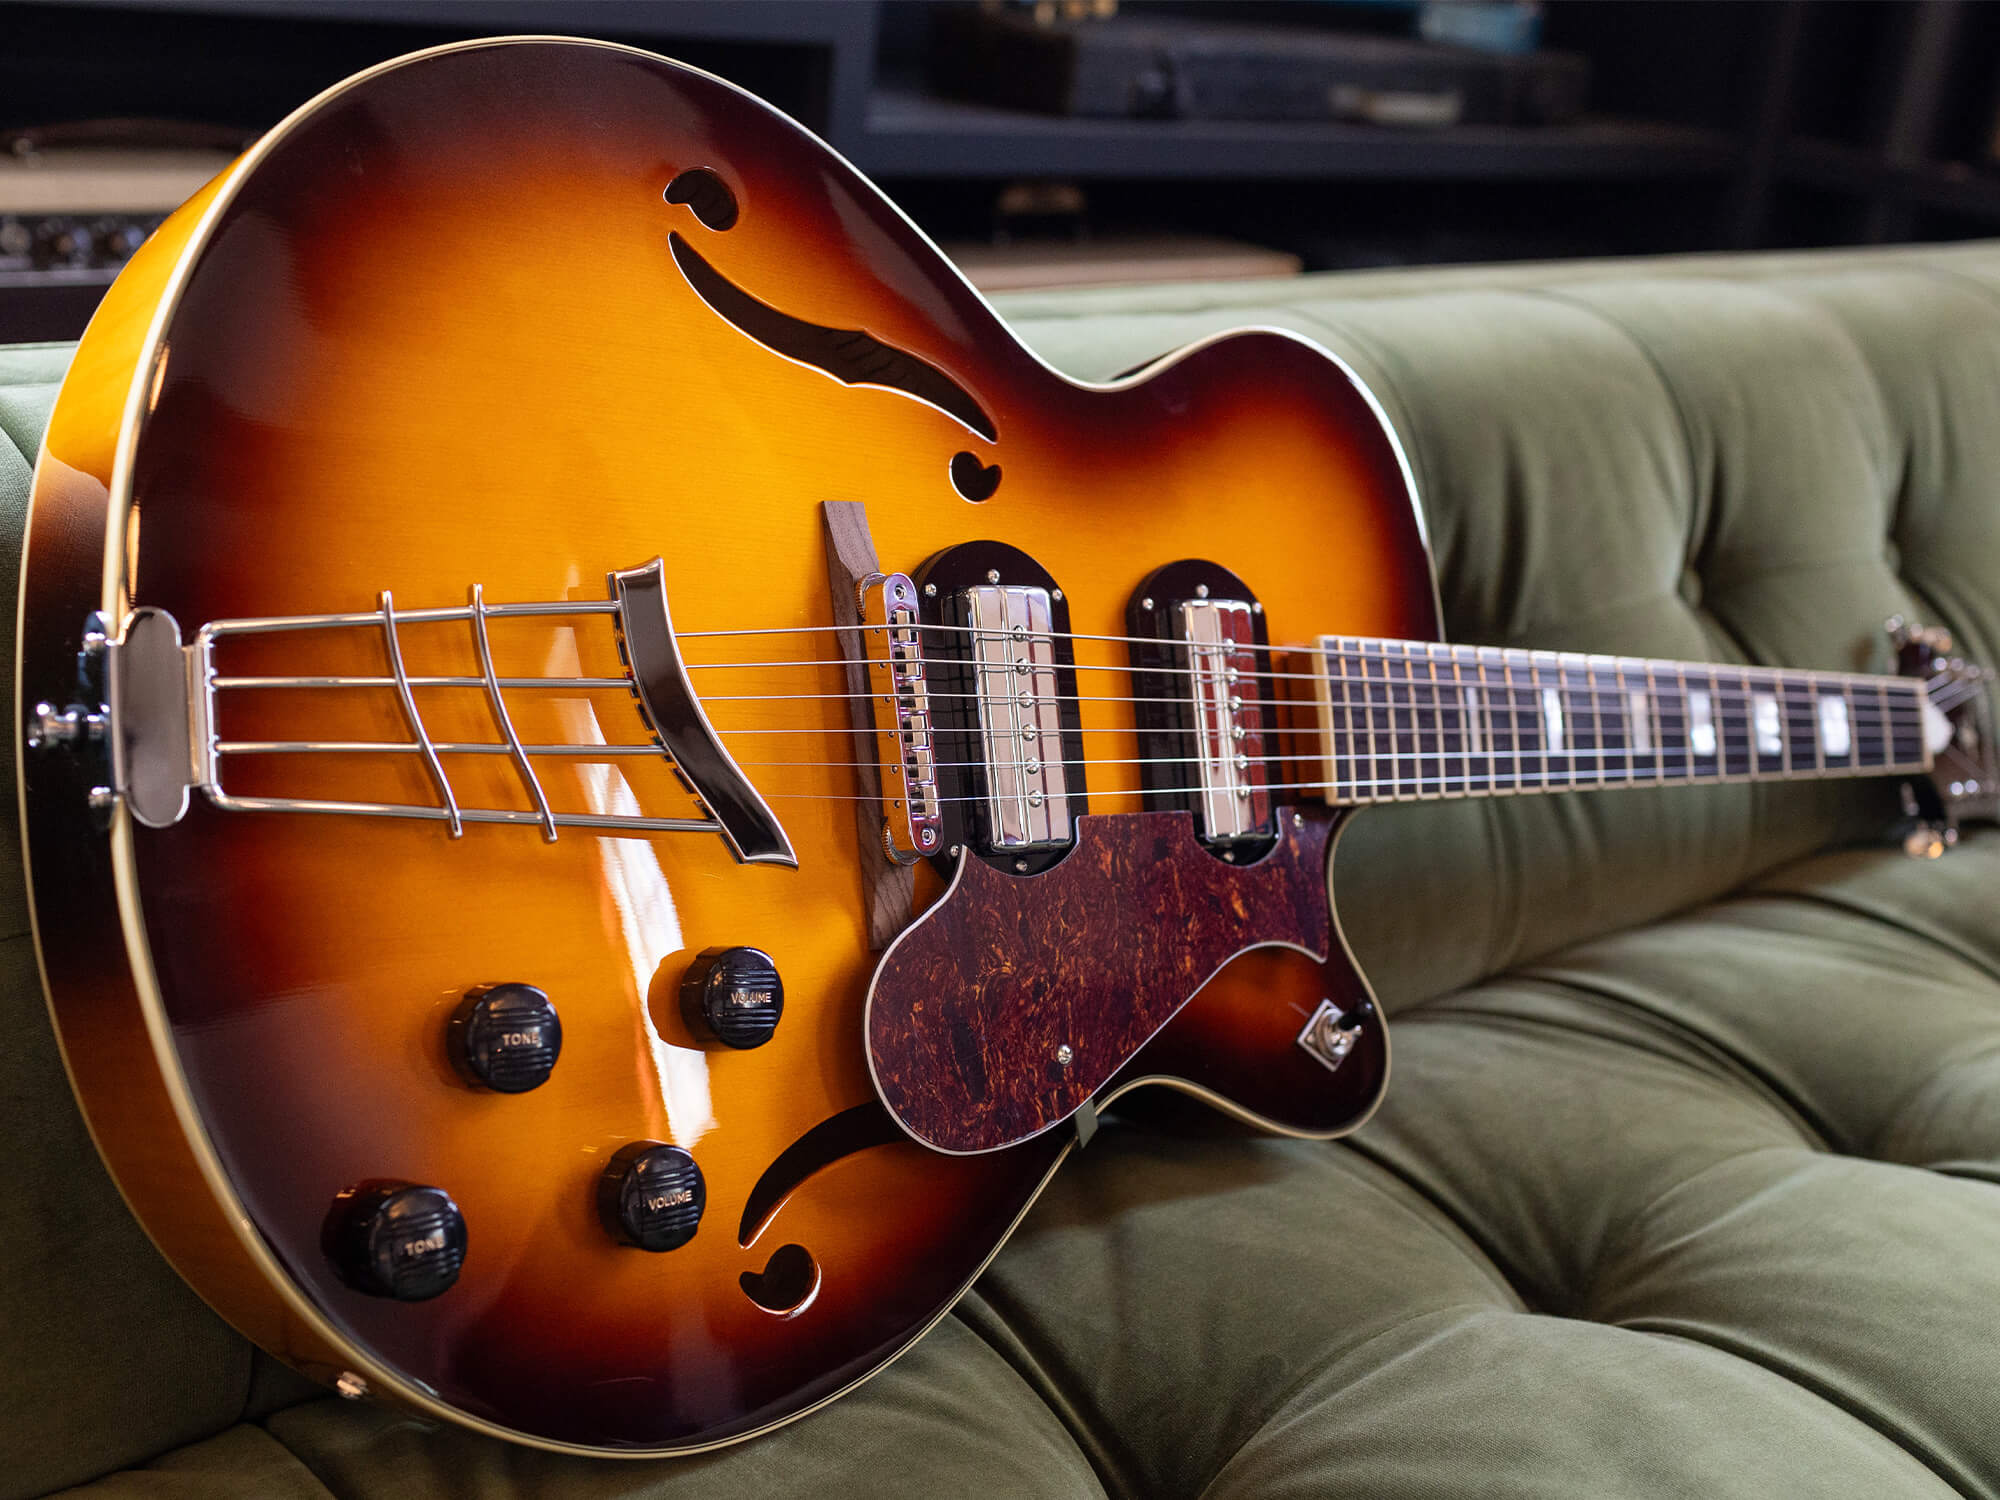 A close up shot of the H62. It is in a classic Sunburst finish and shows two F holes.